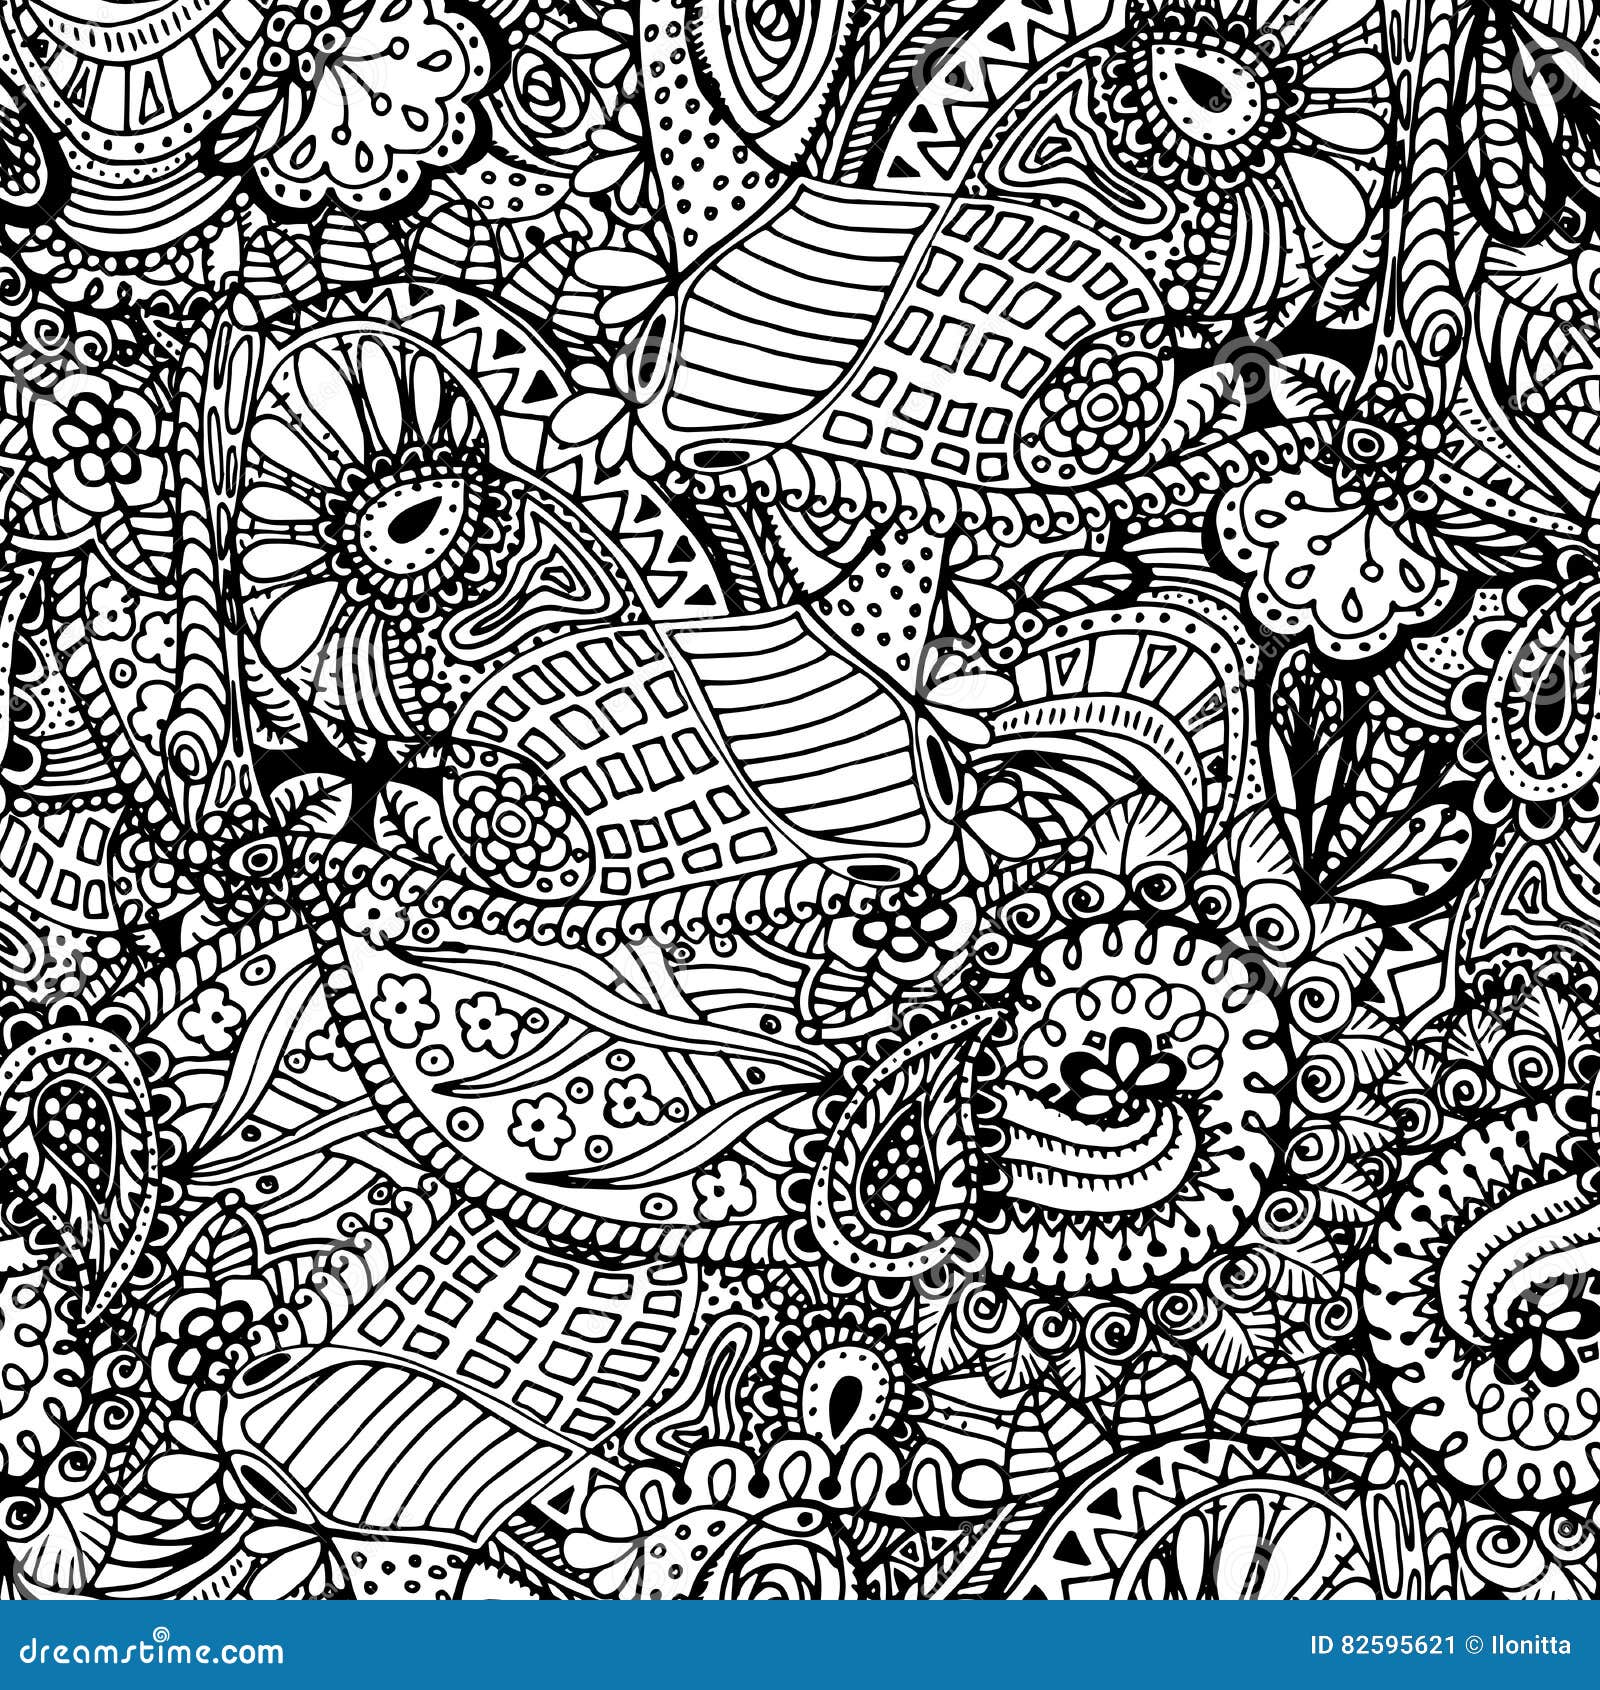 Coloring Book Page Design with Seamless Pattern. Mandala Ethnic ...